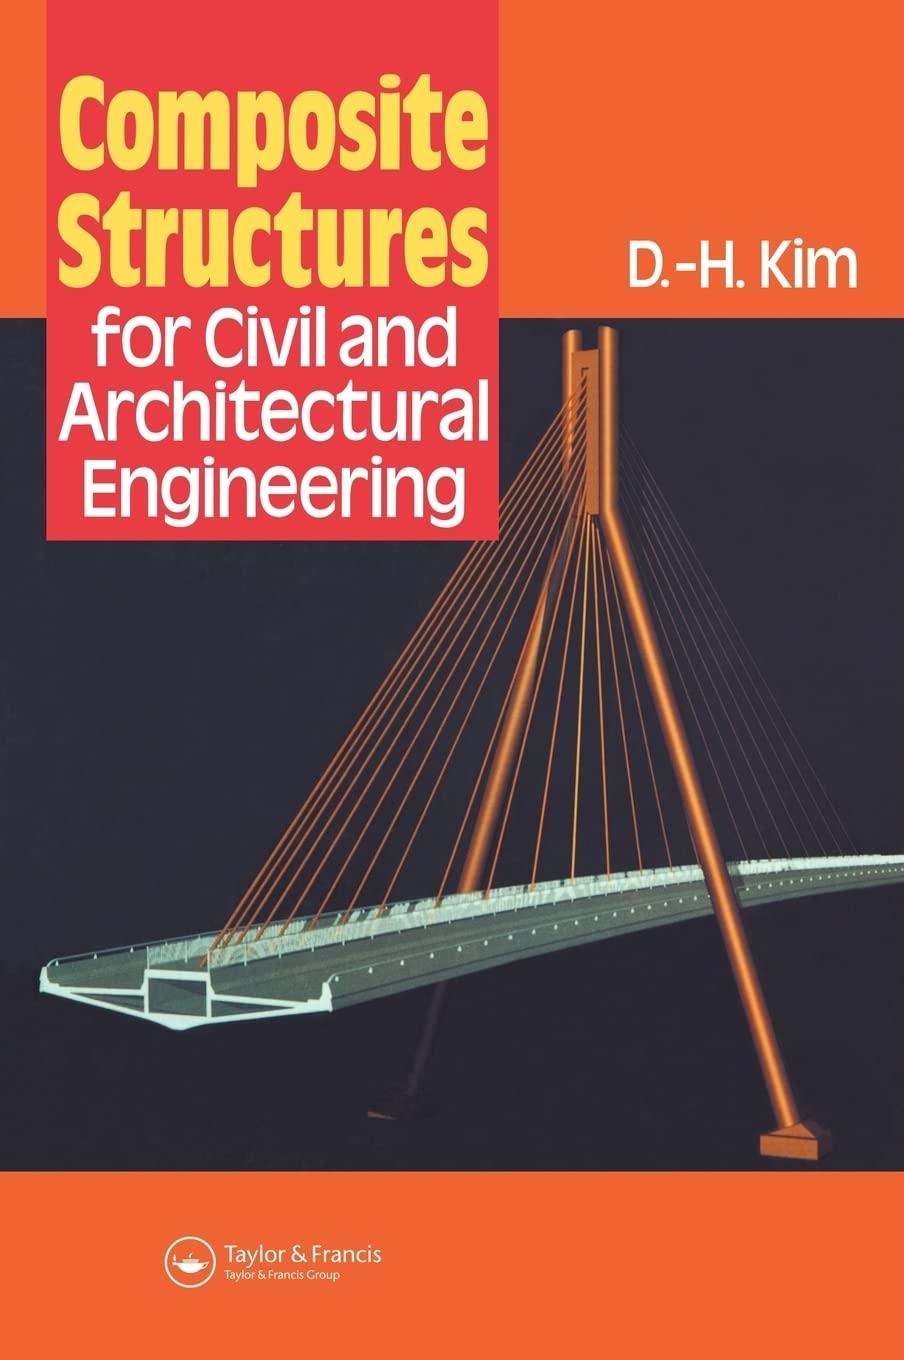 composite structures for civil and architectural engineering 1st edition d-h kim 0419191704, 978-0419191704